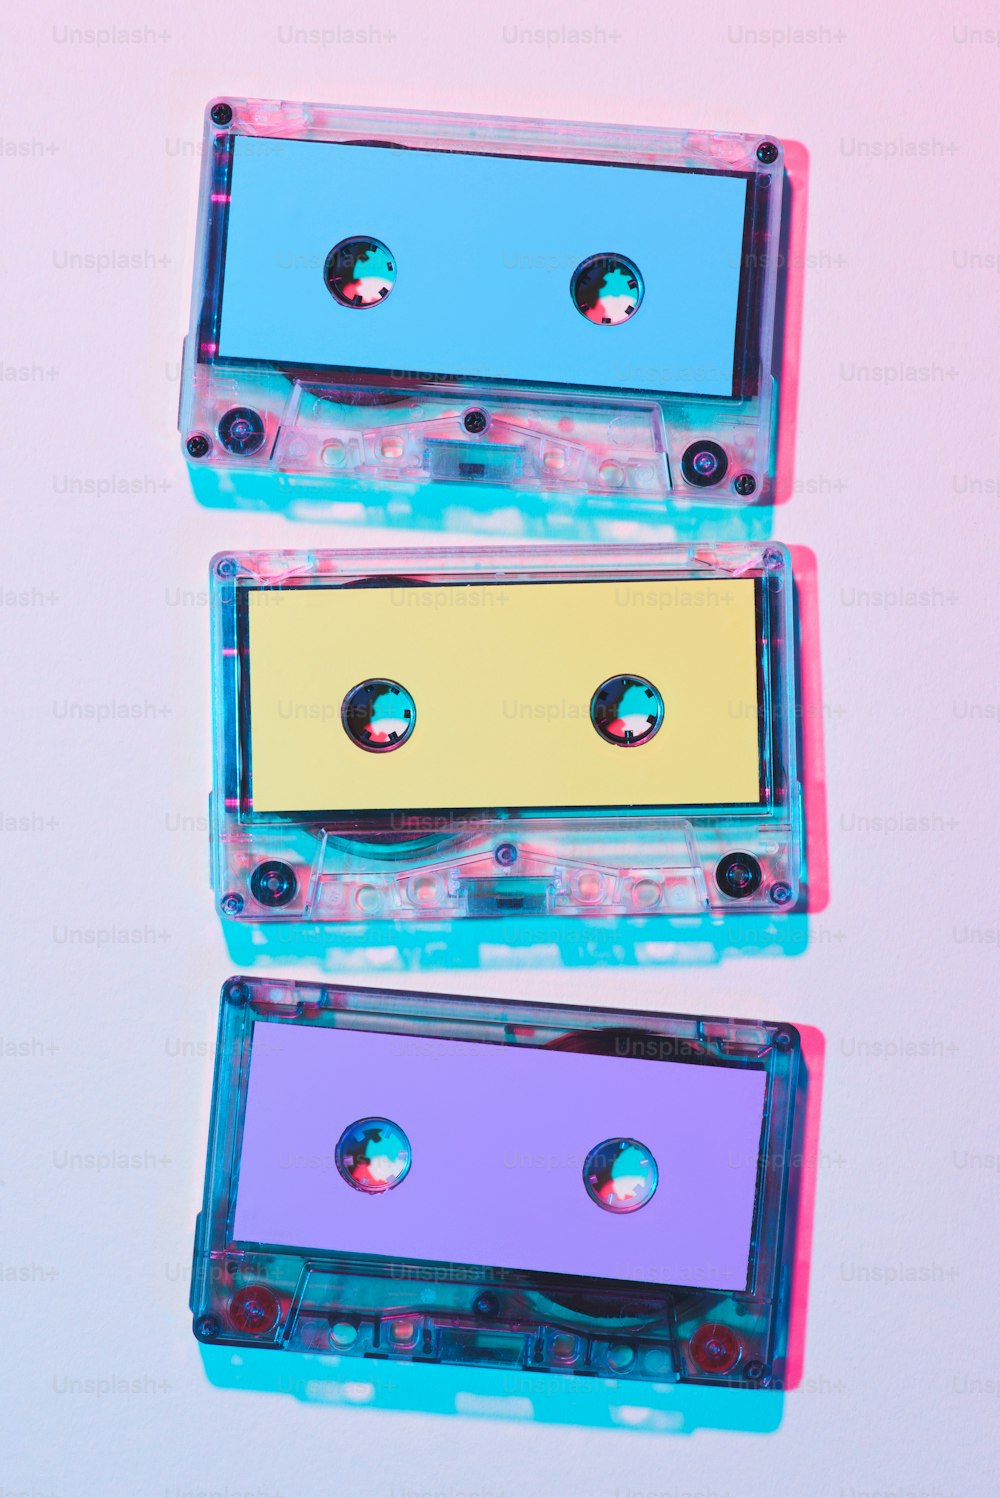 top view of arranged colorful audio cassettes on purple background